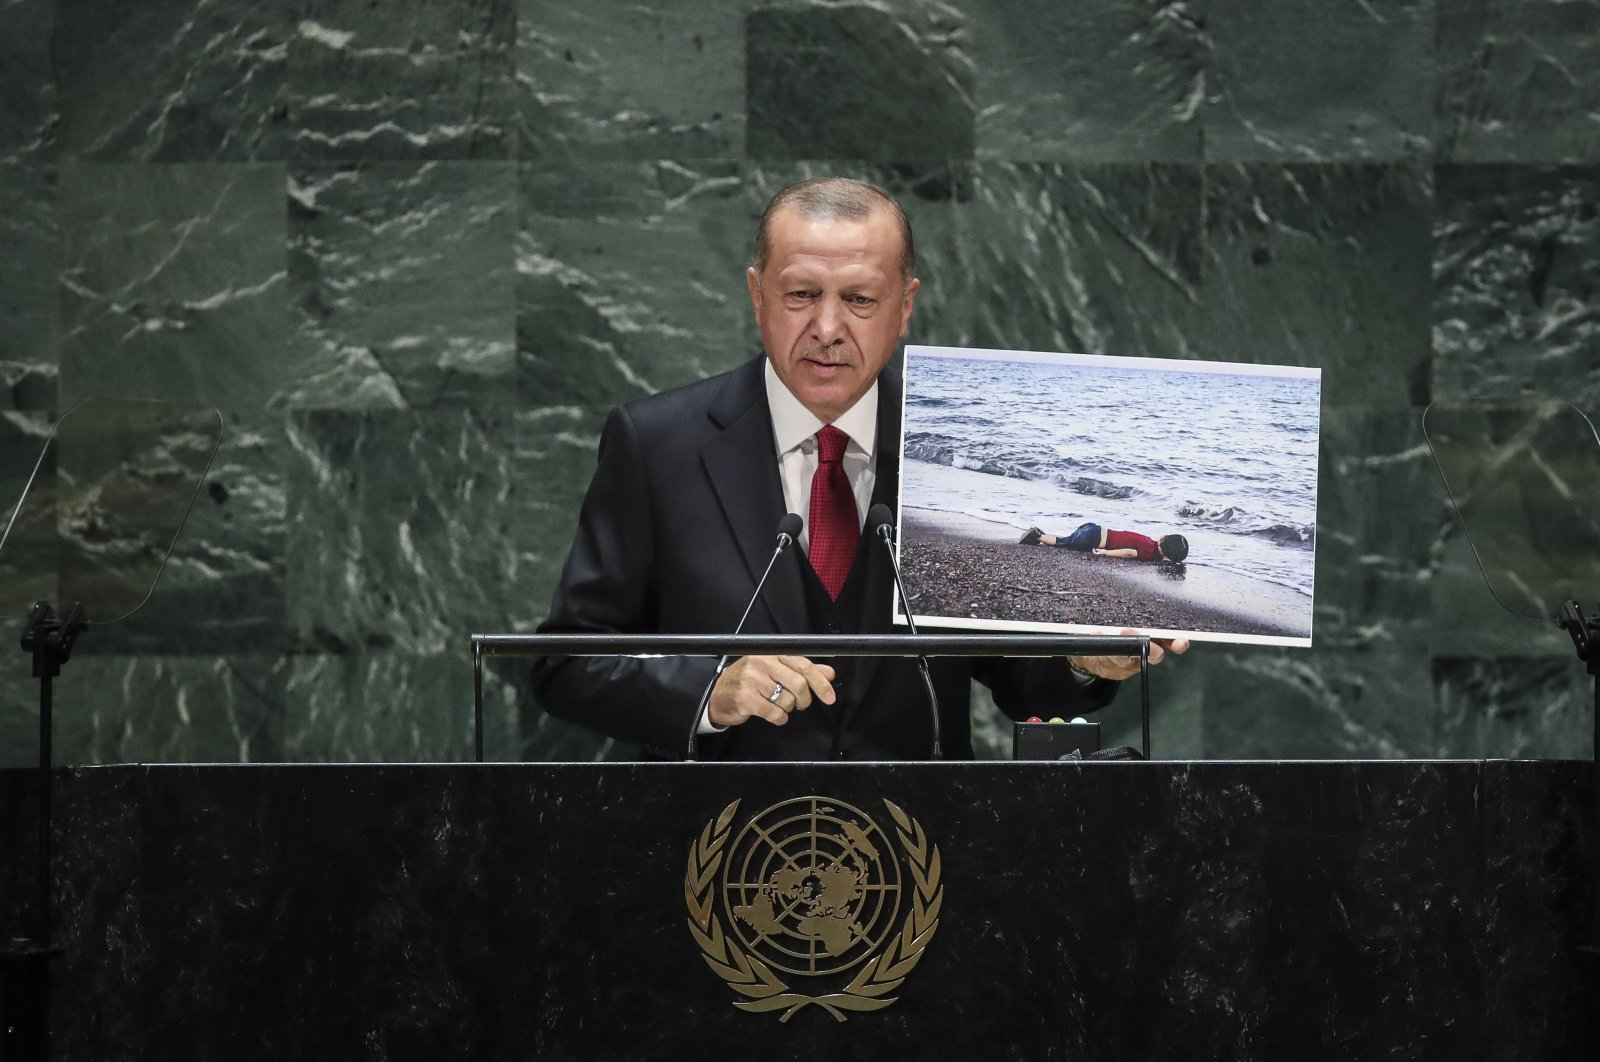 President Recep Tayyip Erdoğan holds a photo of Alan Kurdi, a young Syrian refugee who drowned in the Mediterranean Sea, while speaking at the U.N. General Assembly, in New York, U.S., Sept. 24, 2019. (AFP Photo)